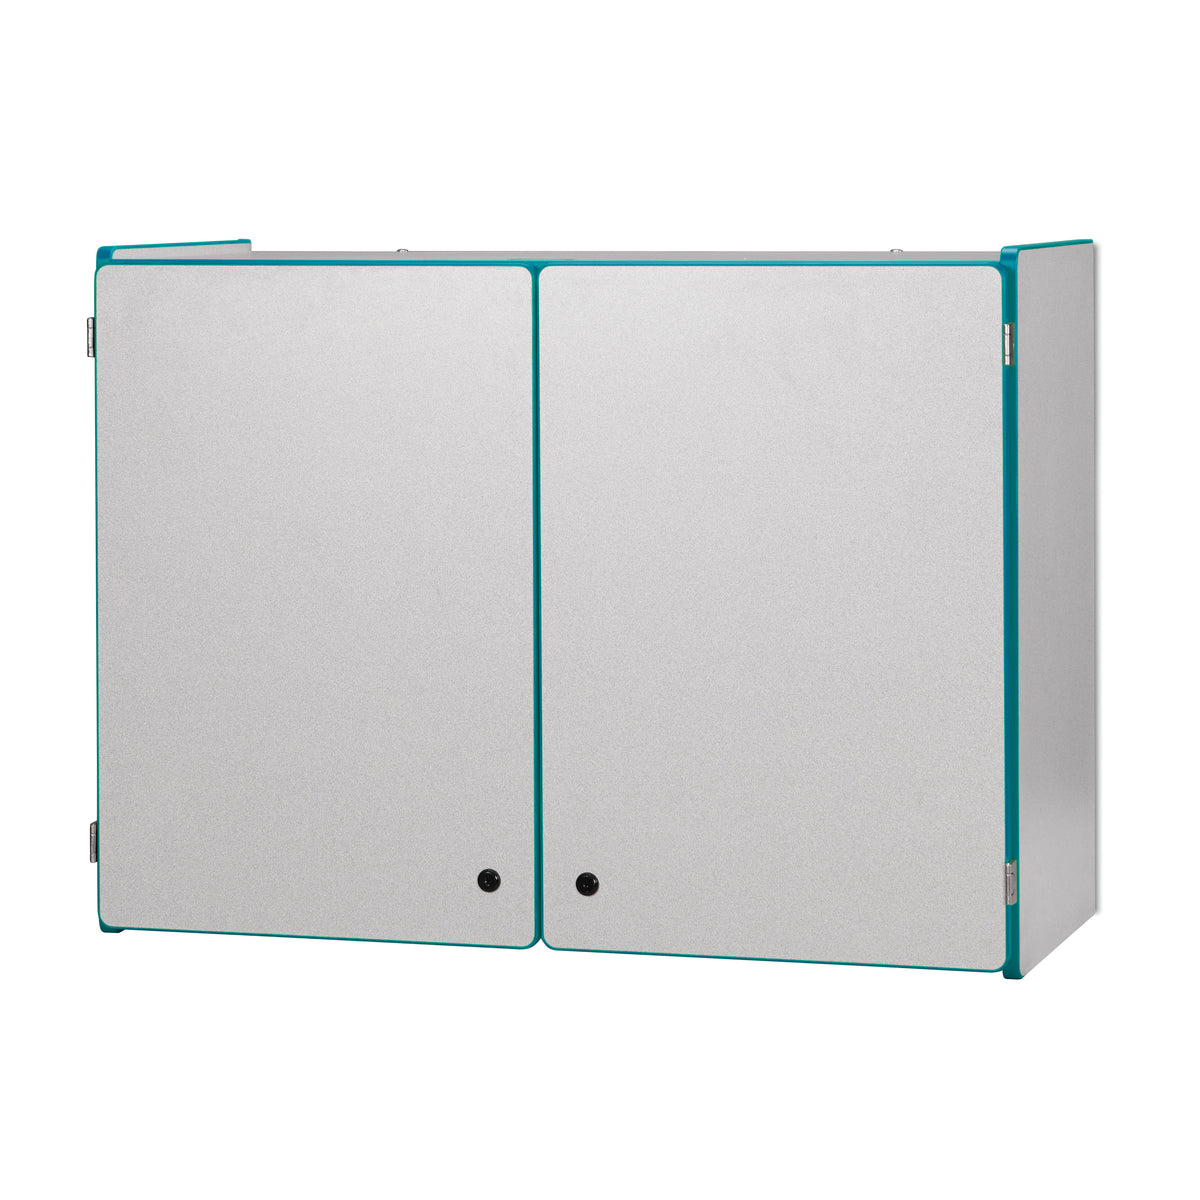 0945JC005, Rainbow Accents Lockable Wall Cabinet - Teal